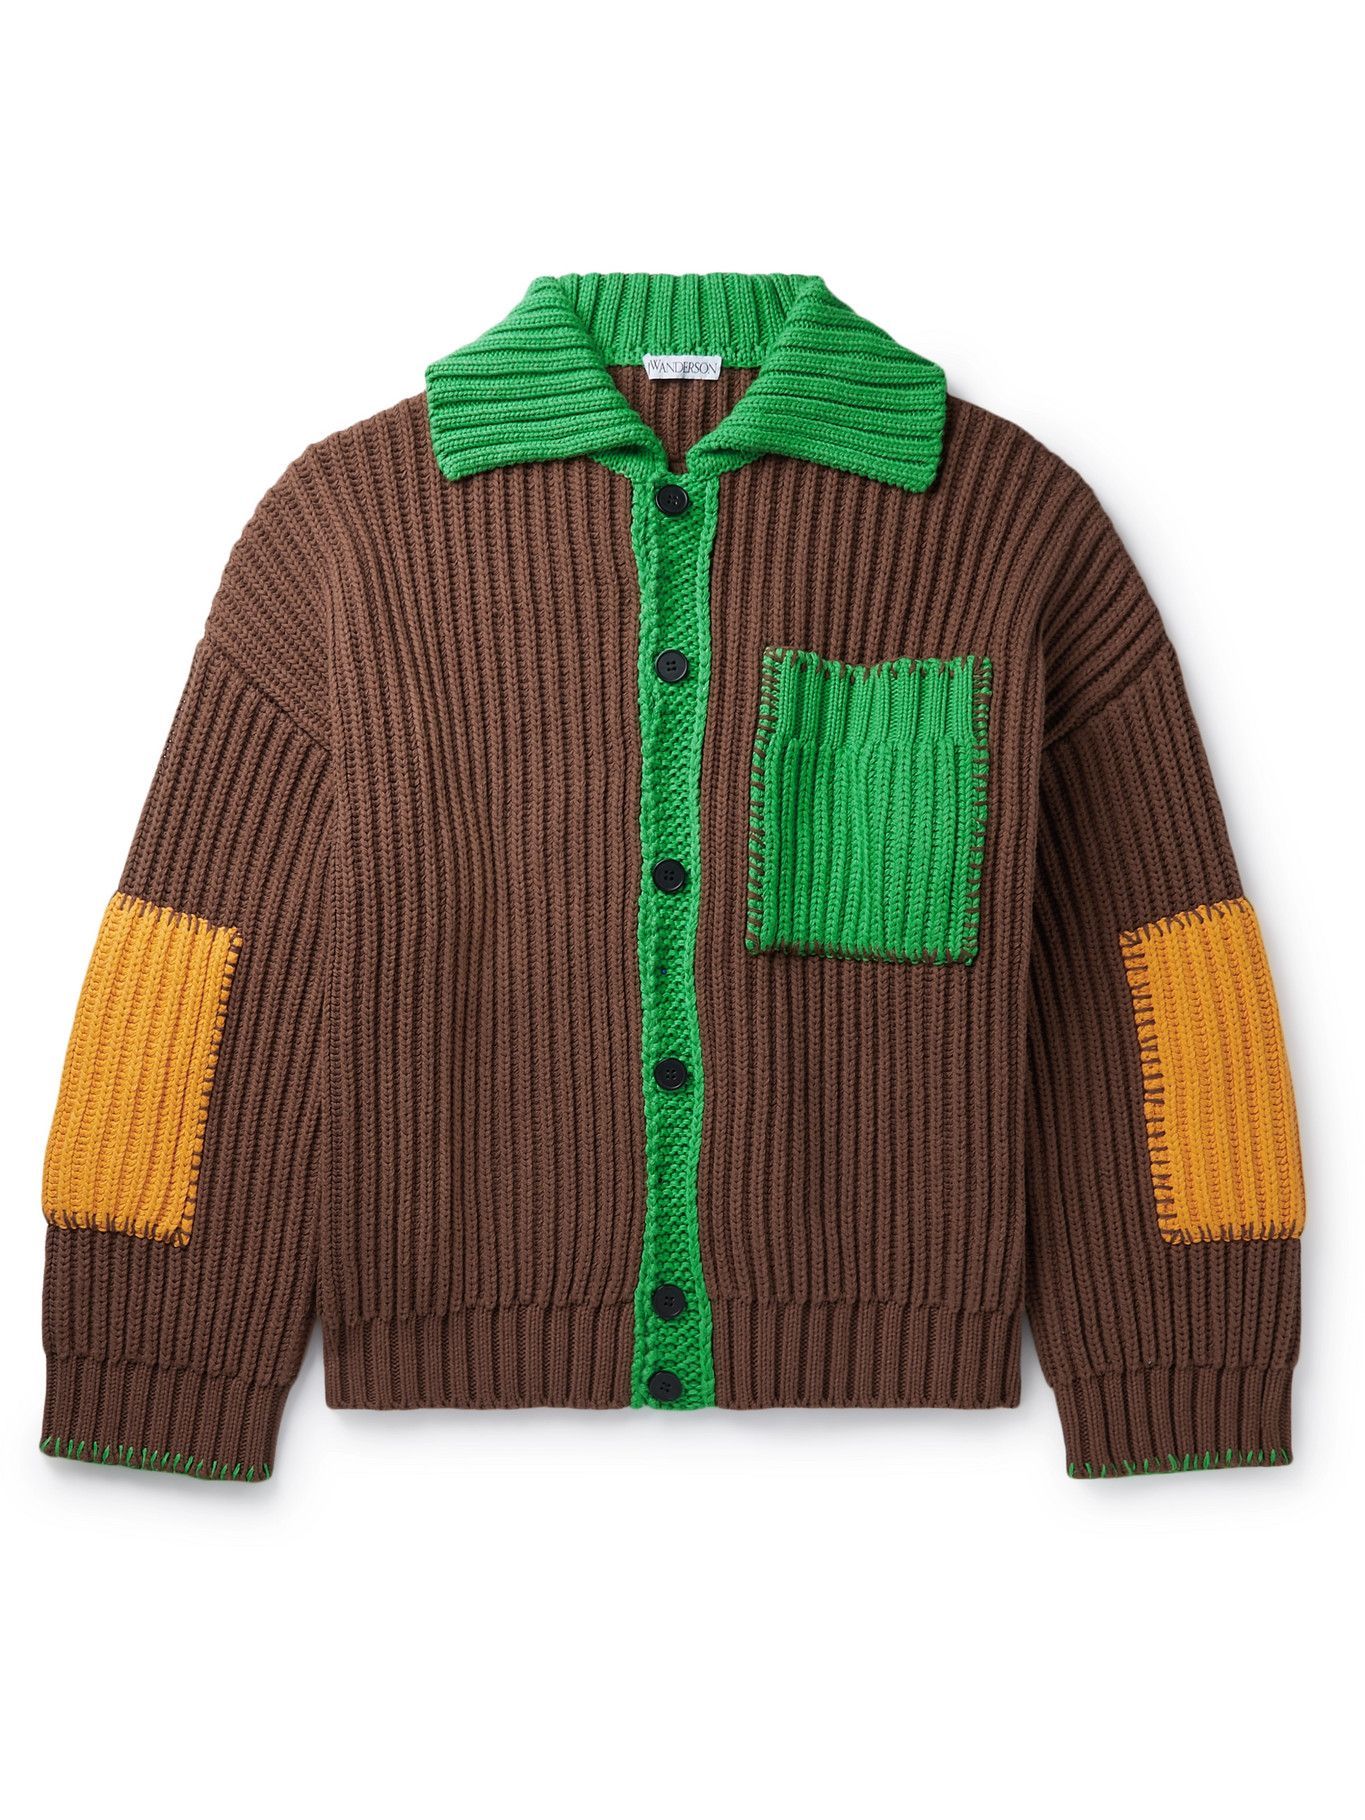 JW Anderson - Patchwork Ribbed Cotton-Blend Cardigan JW Anderson